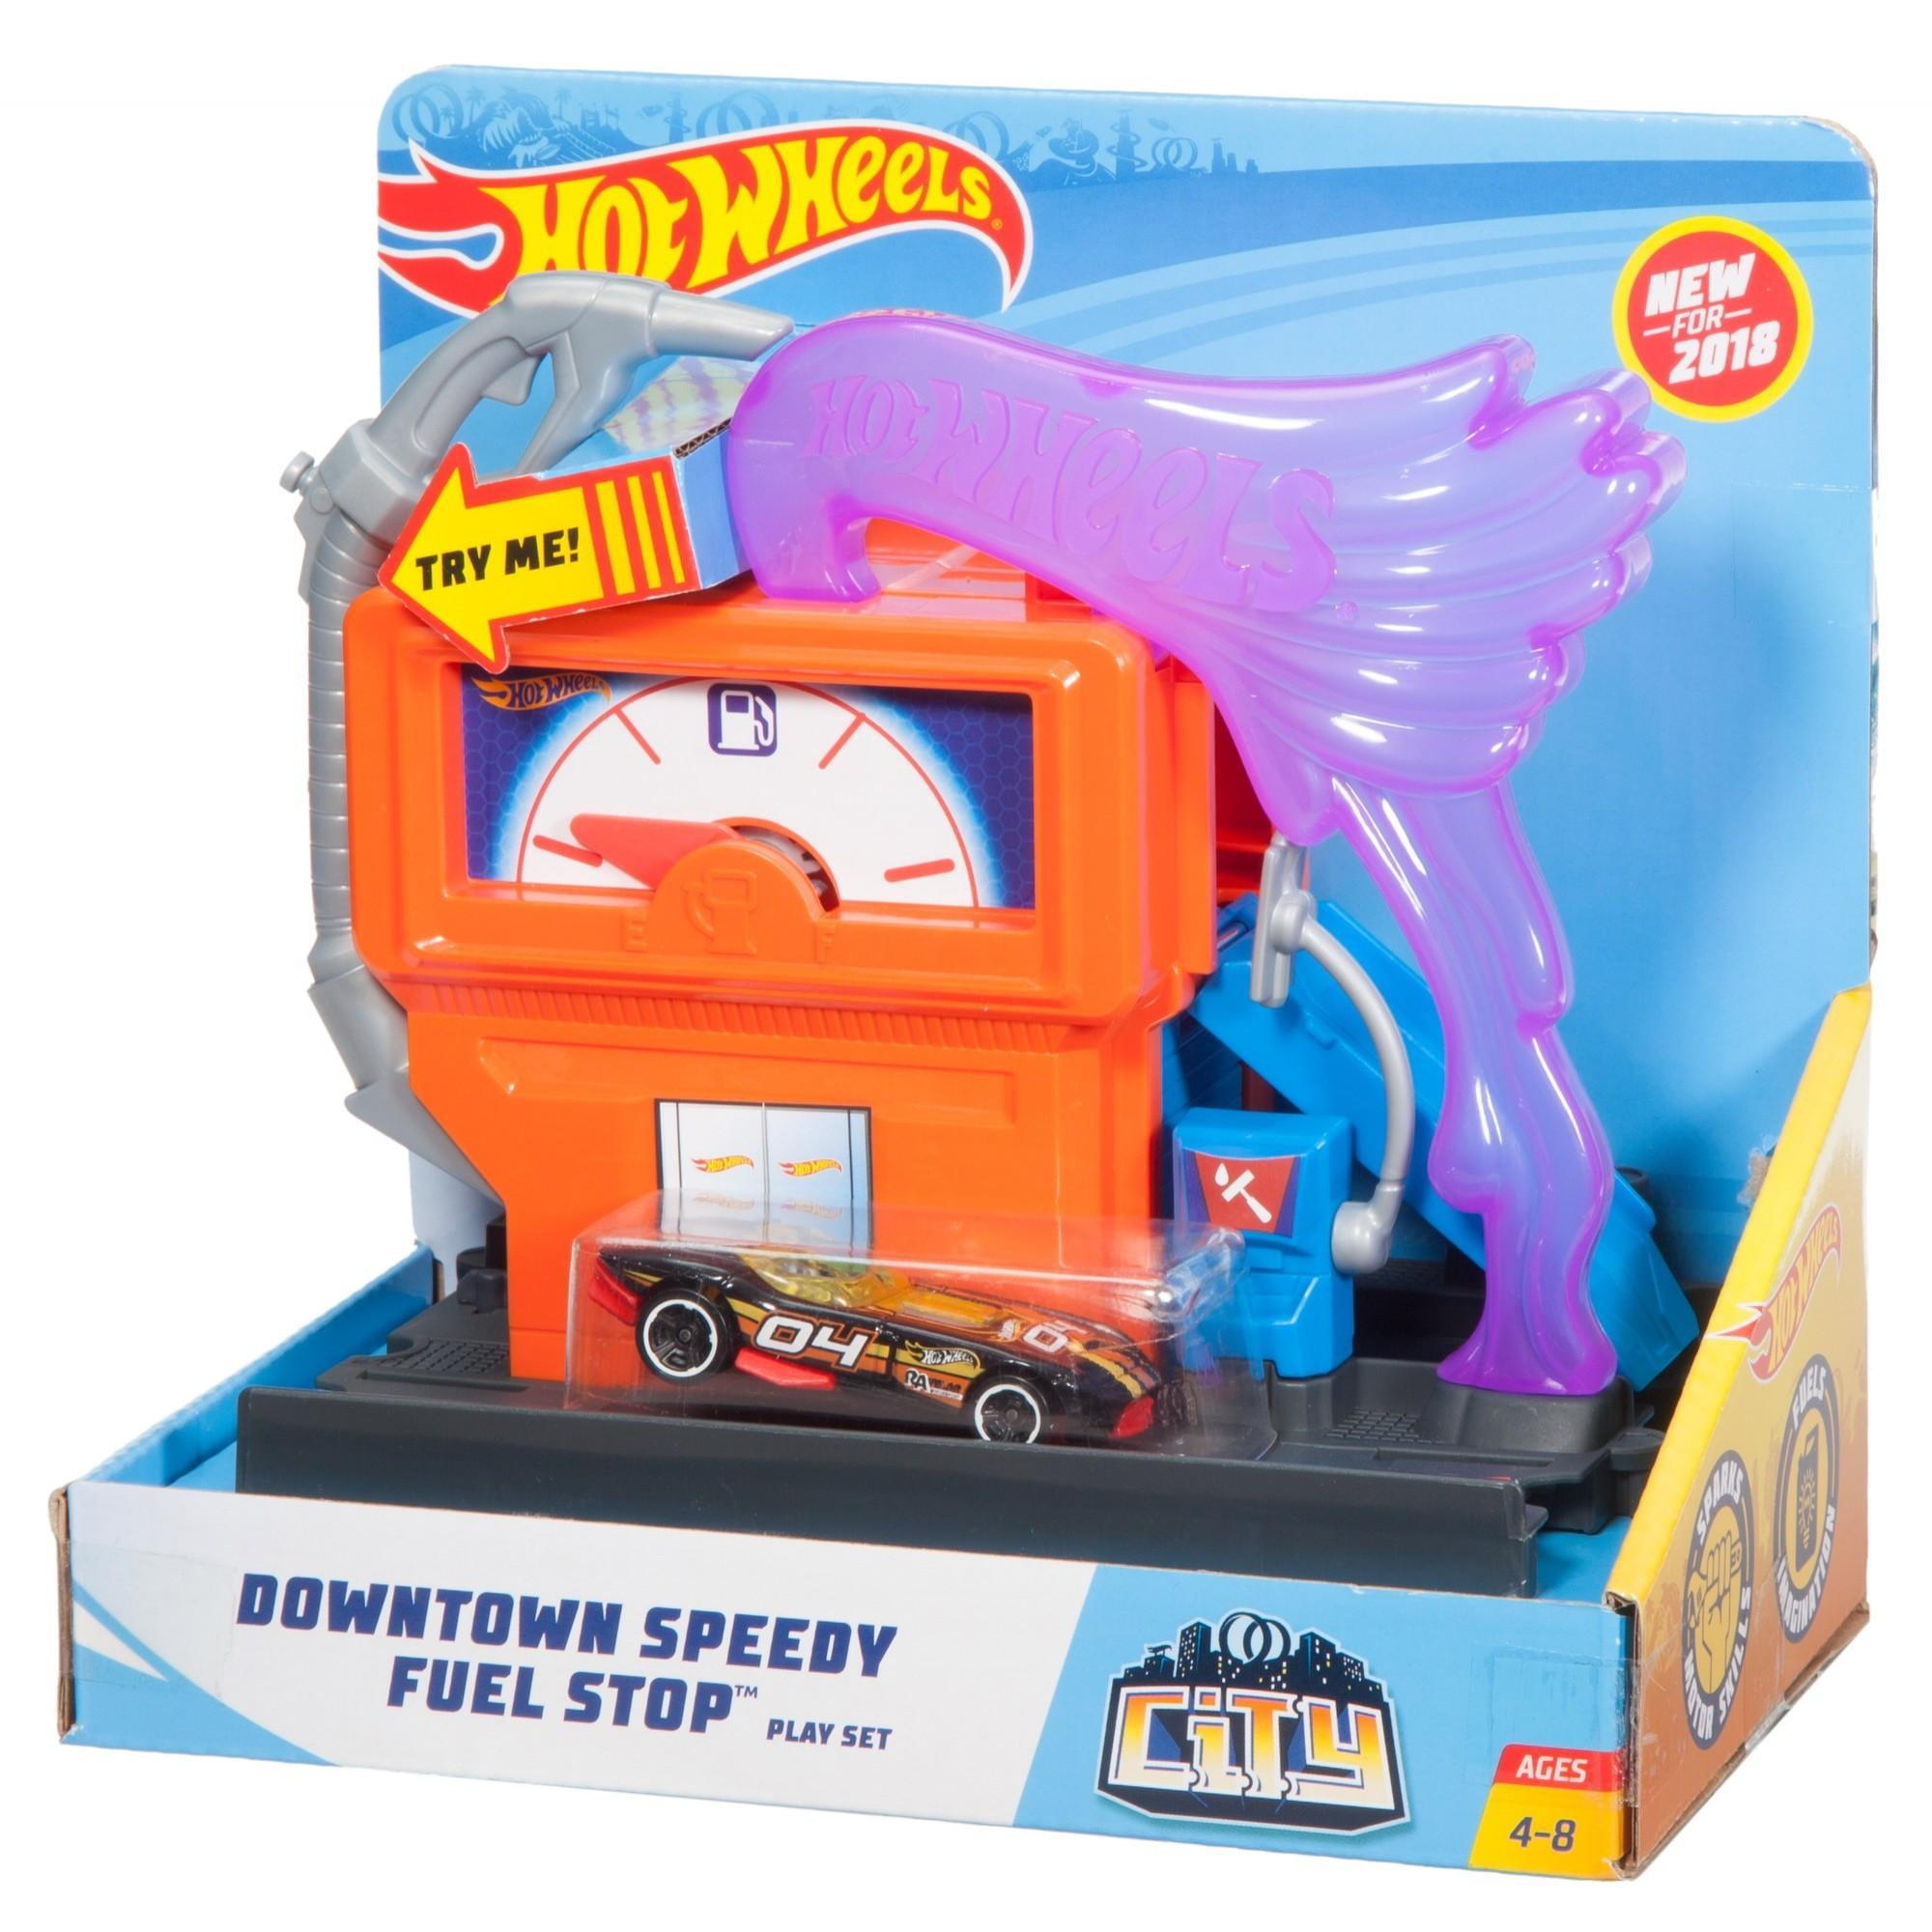 Hot Wheels City Downtown Speedy Fuel Stop Play Set Sparks Motor Skills New!!! 